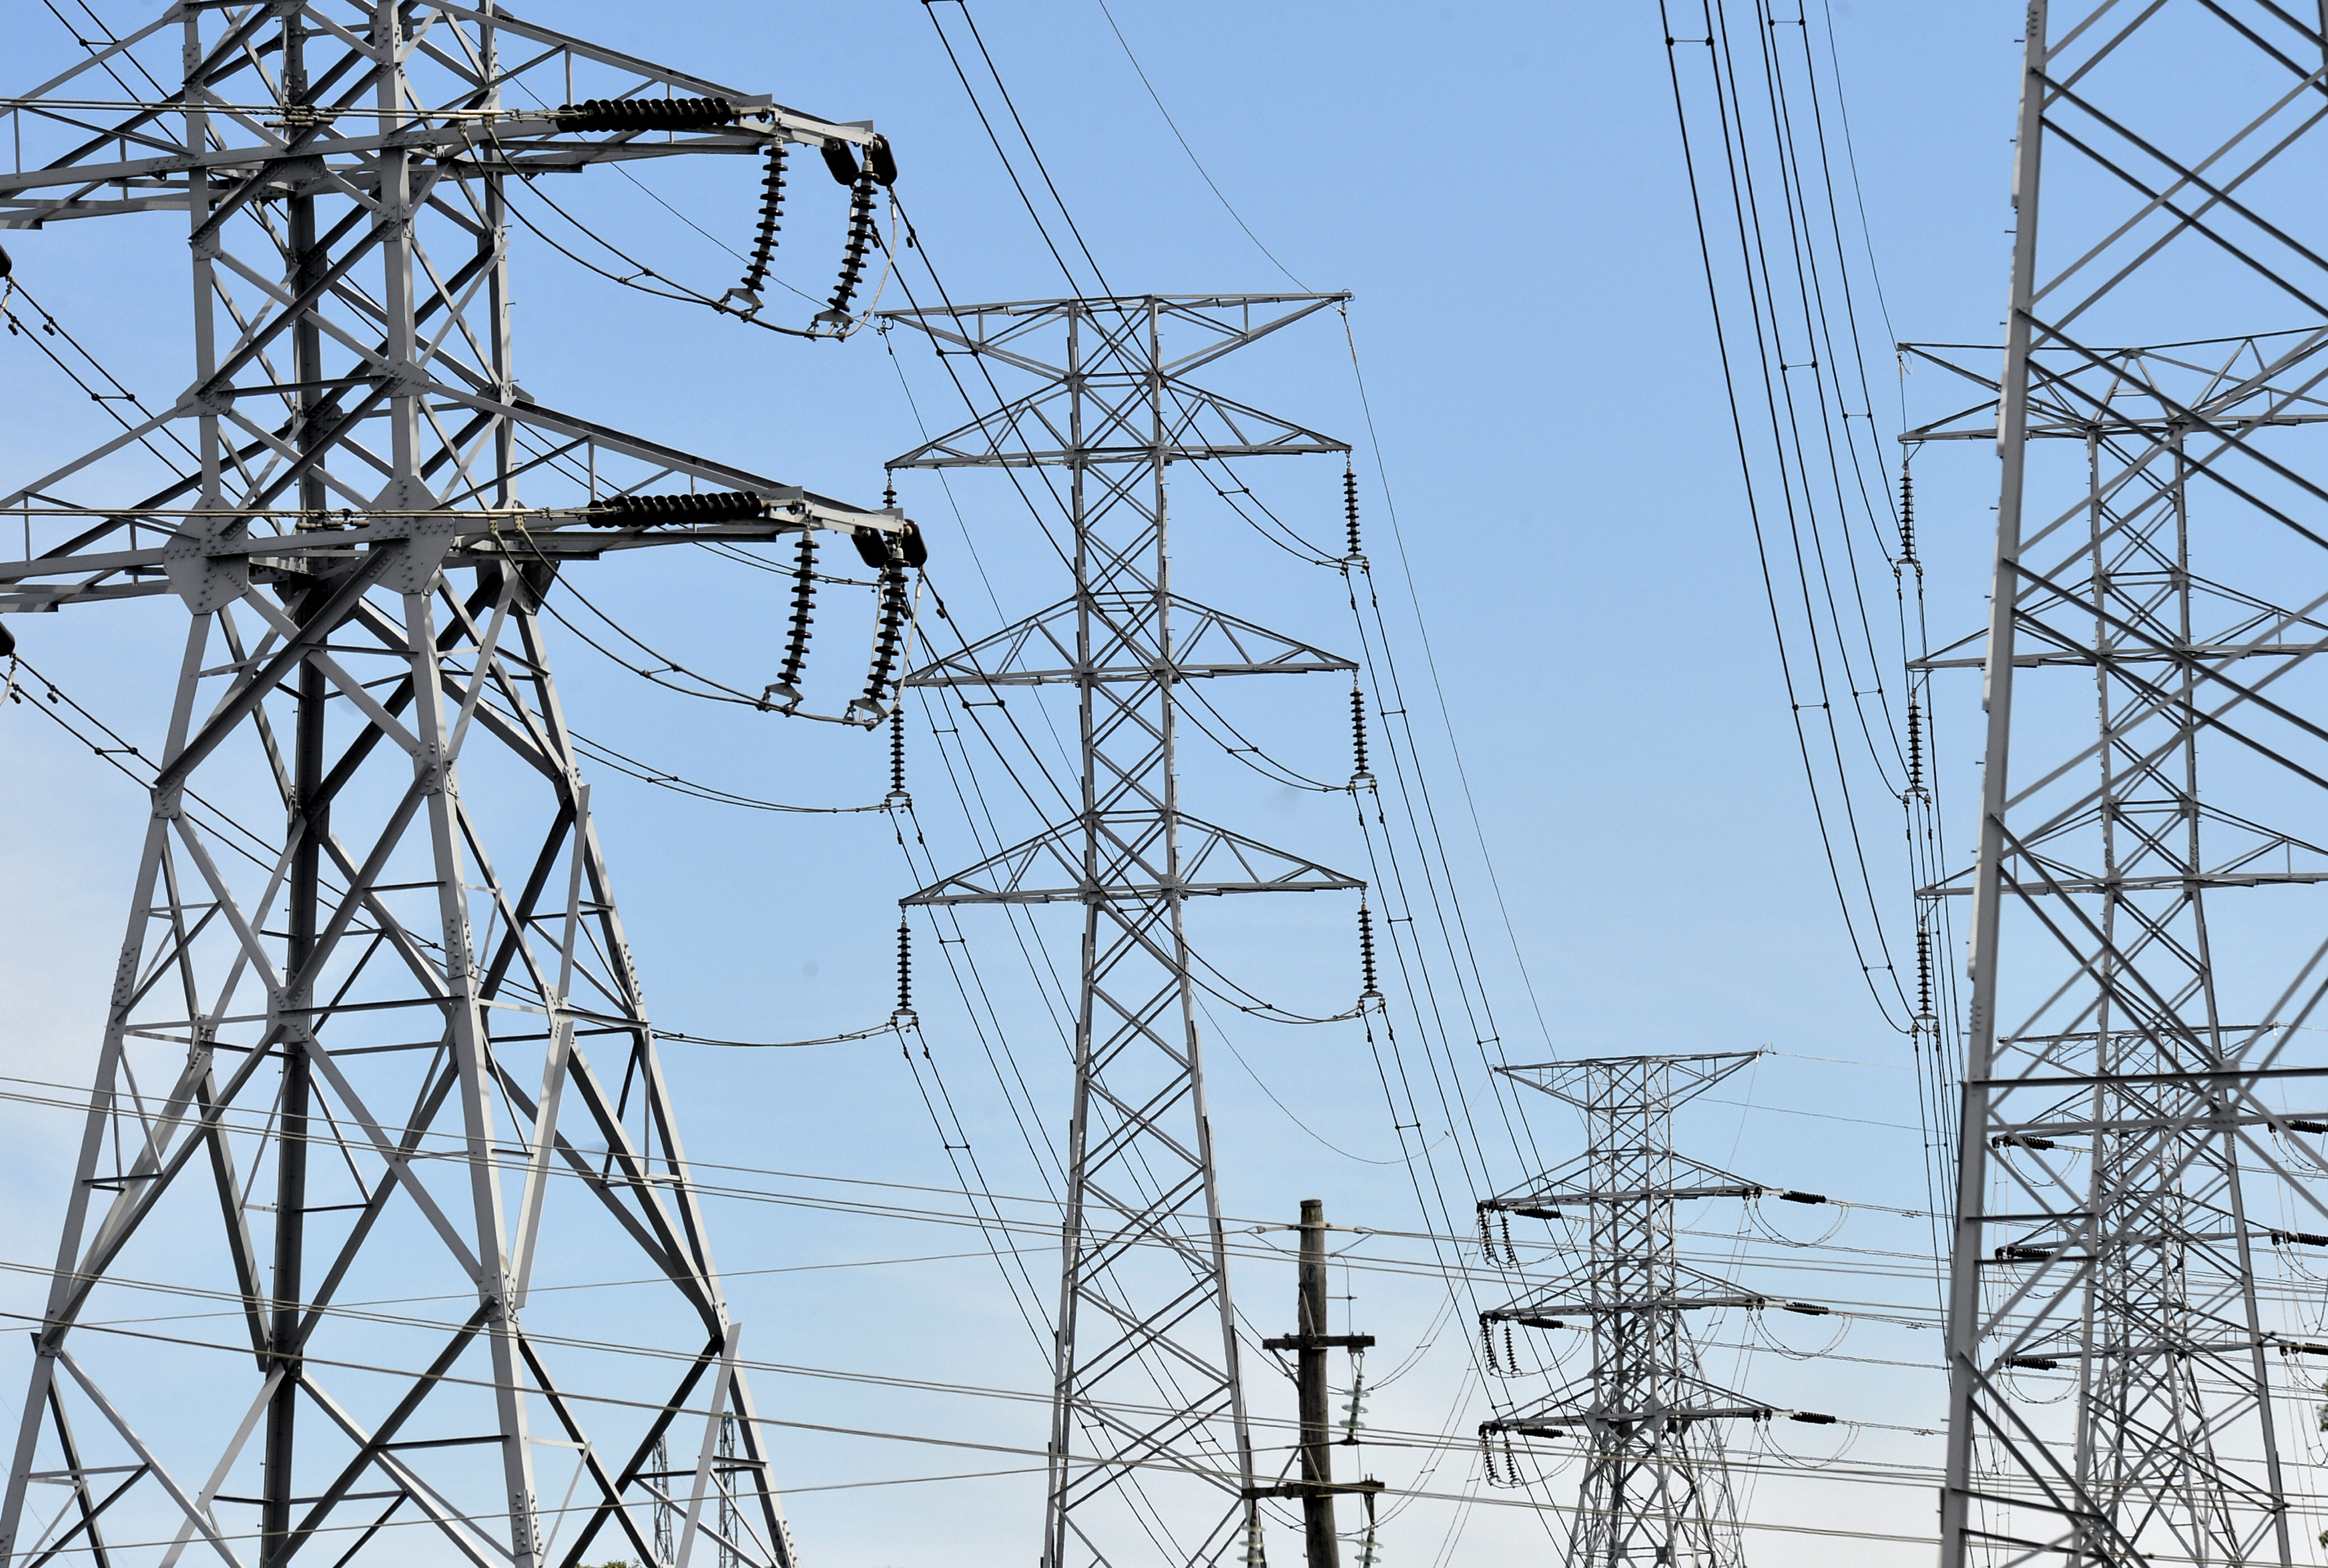 Oman Electricity Transmission Co. has no plans to raise fund, says Nama group